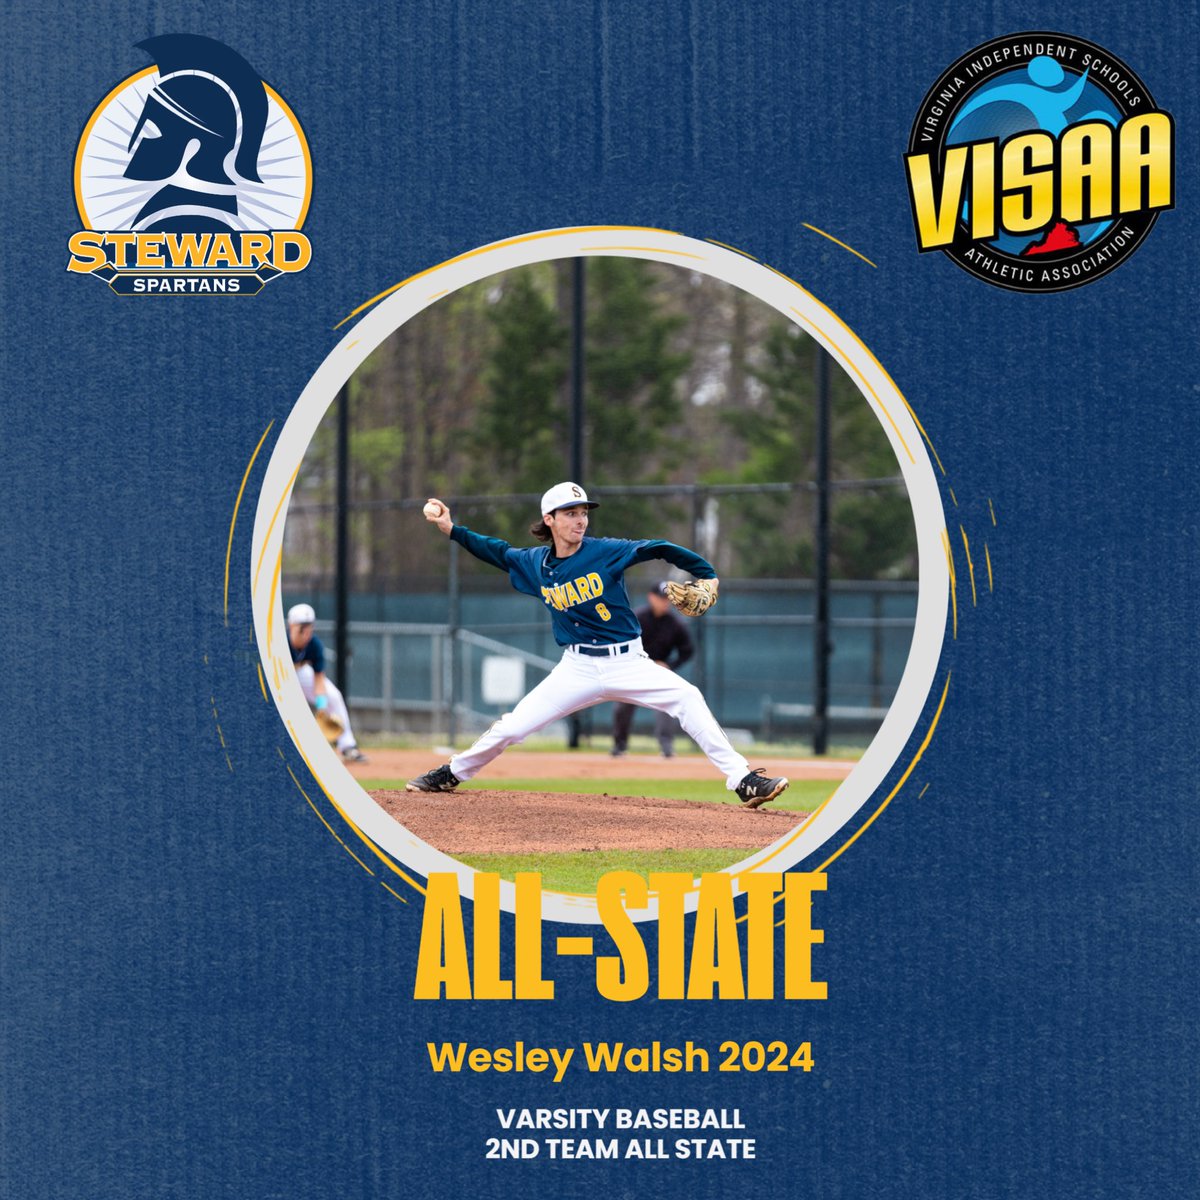 Congratulations to Wesley Walsh ‘24 for being named VISAA DII Second Team All State in baseball!! #GoSpartans #804varsity @henricosports